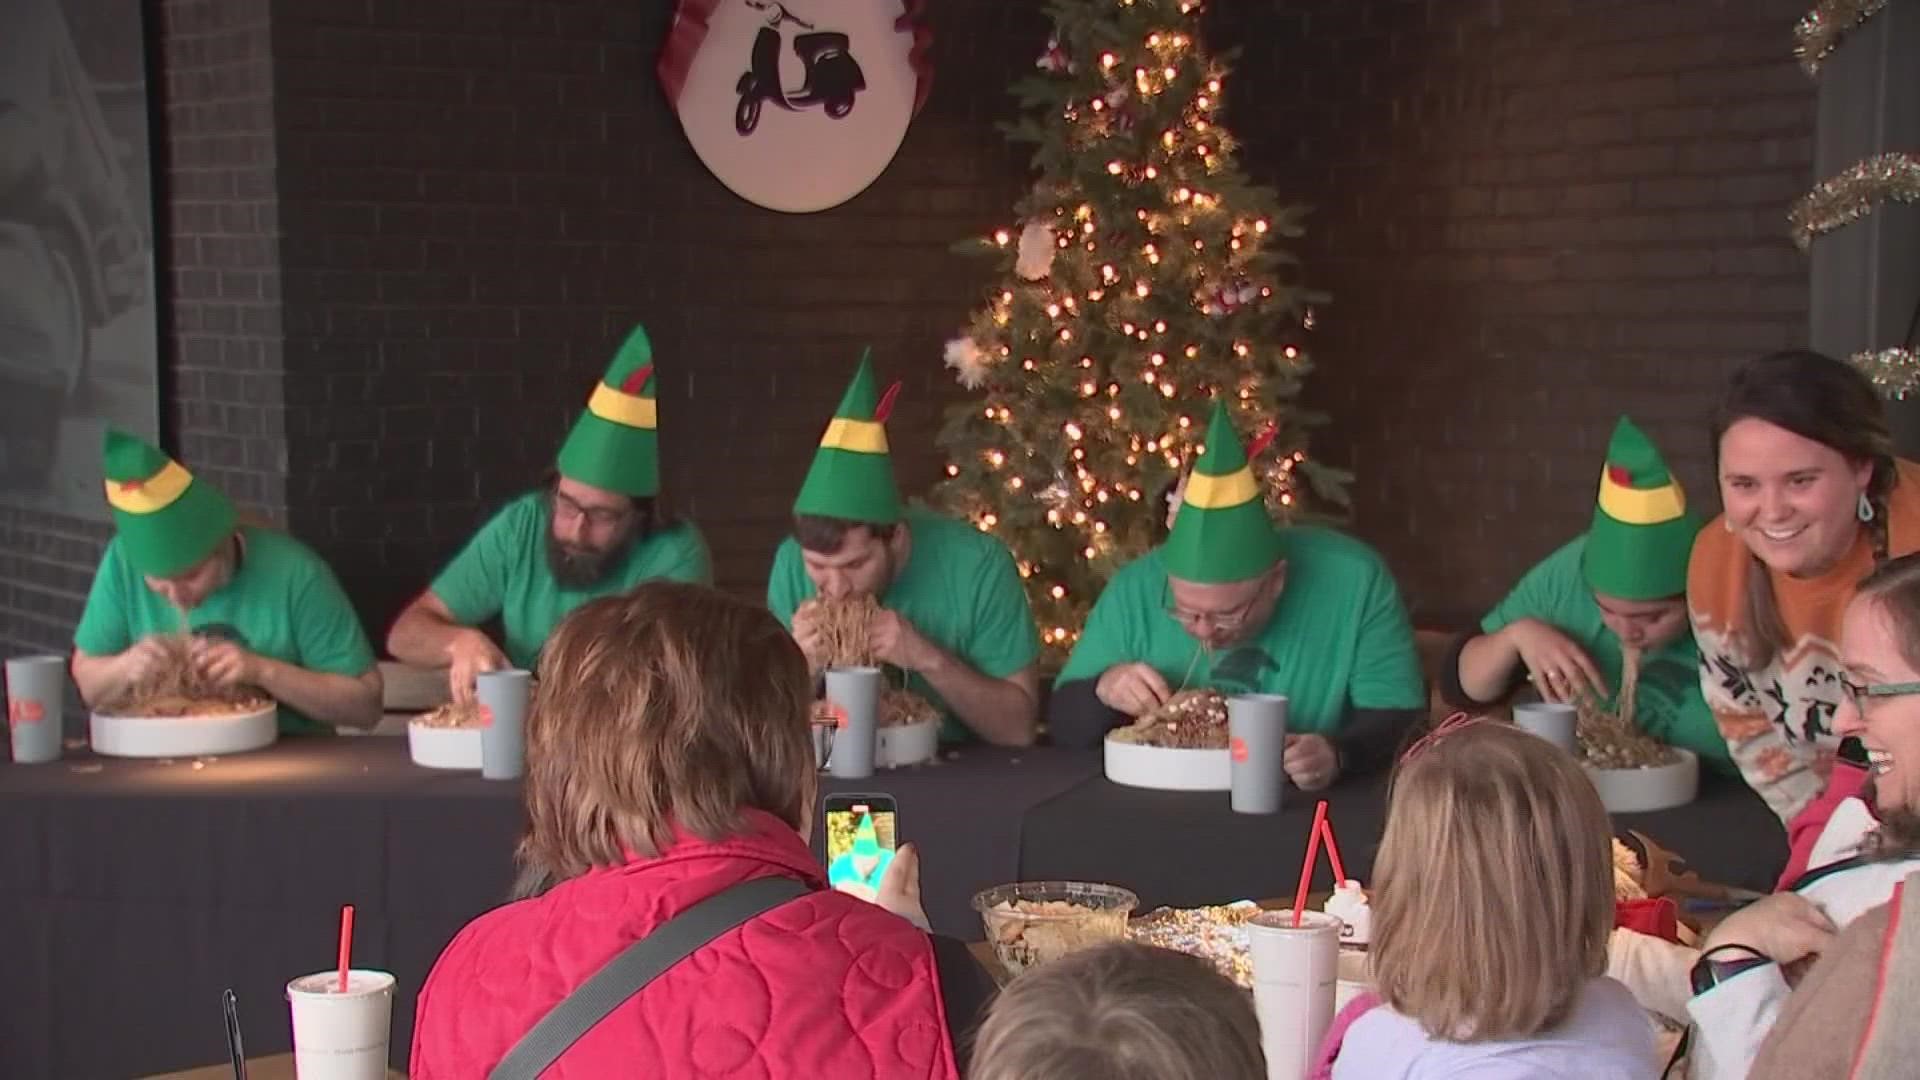 The contest was inspired by the movie "Elf."